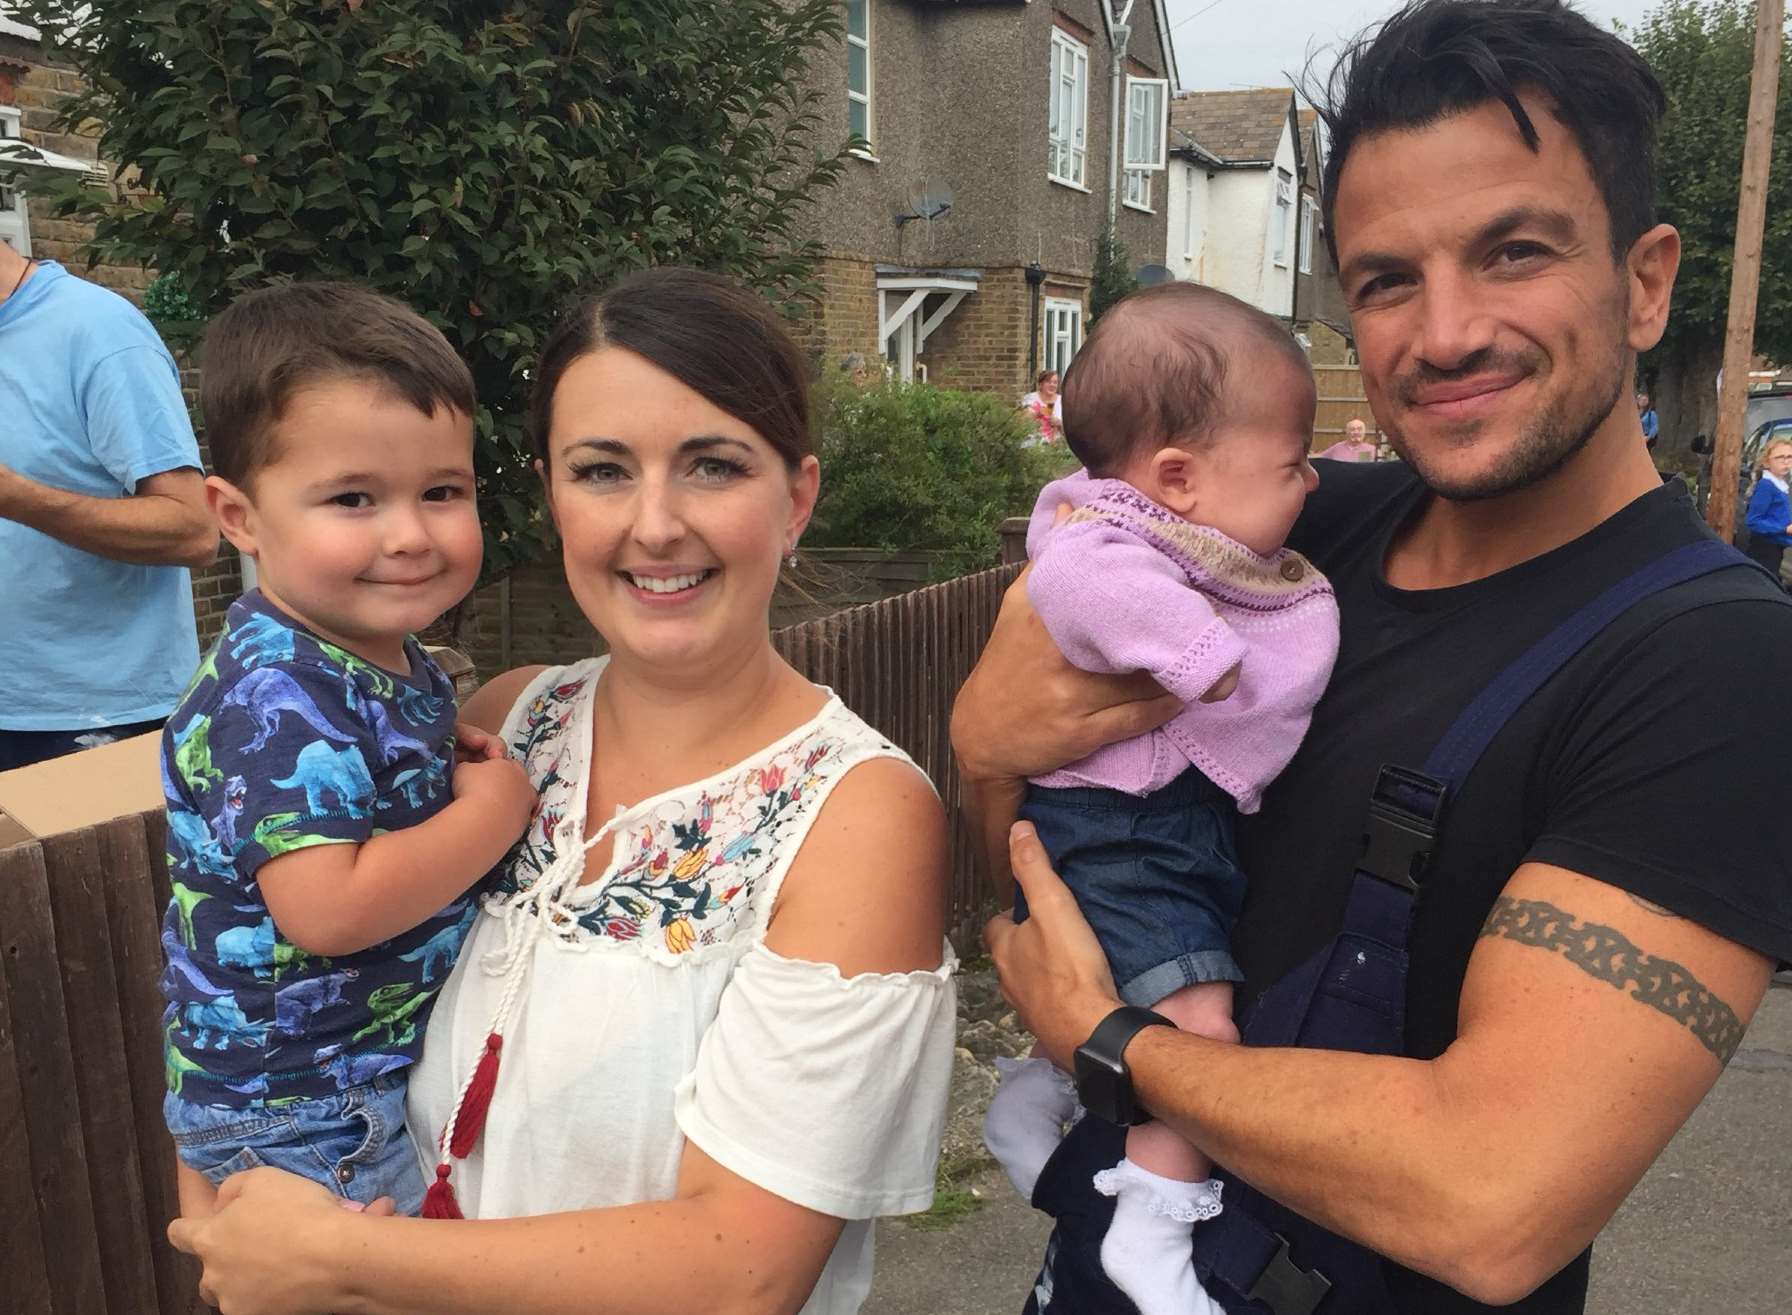 Kimberly Dann with Aussie heartthrob Peter Andre